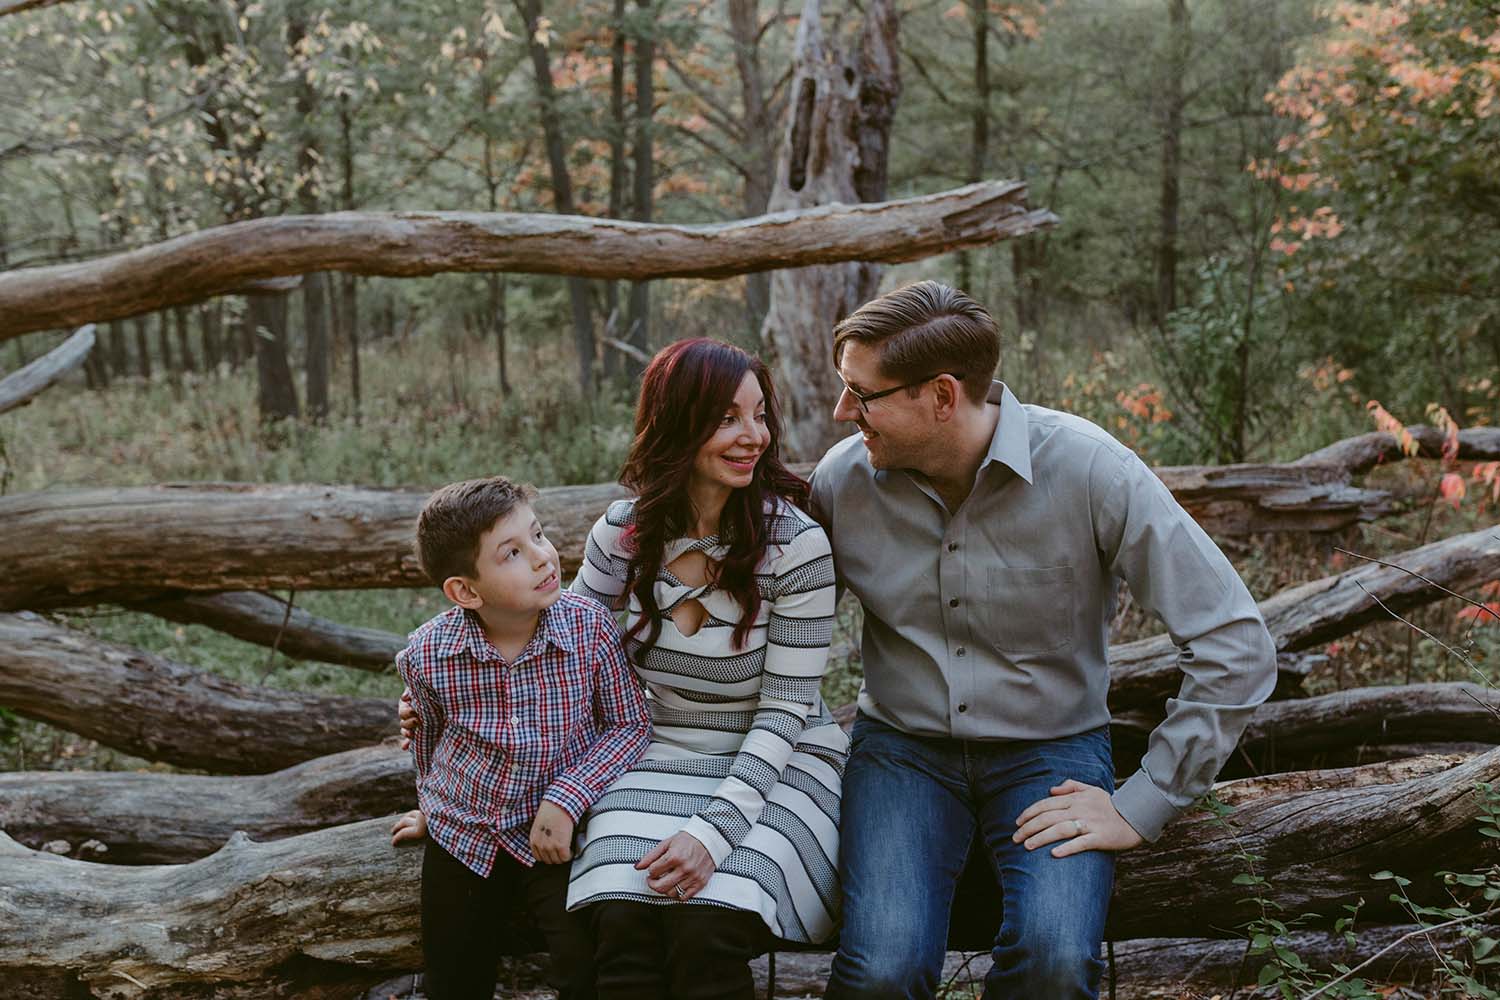 copperred-photography-fall-family-photos.jpg